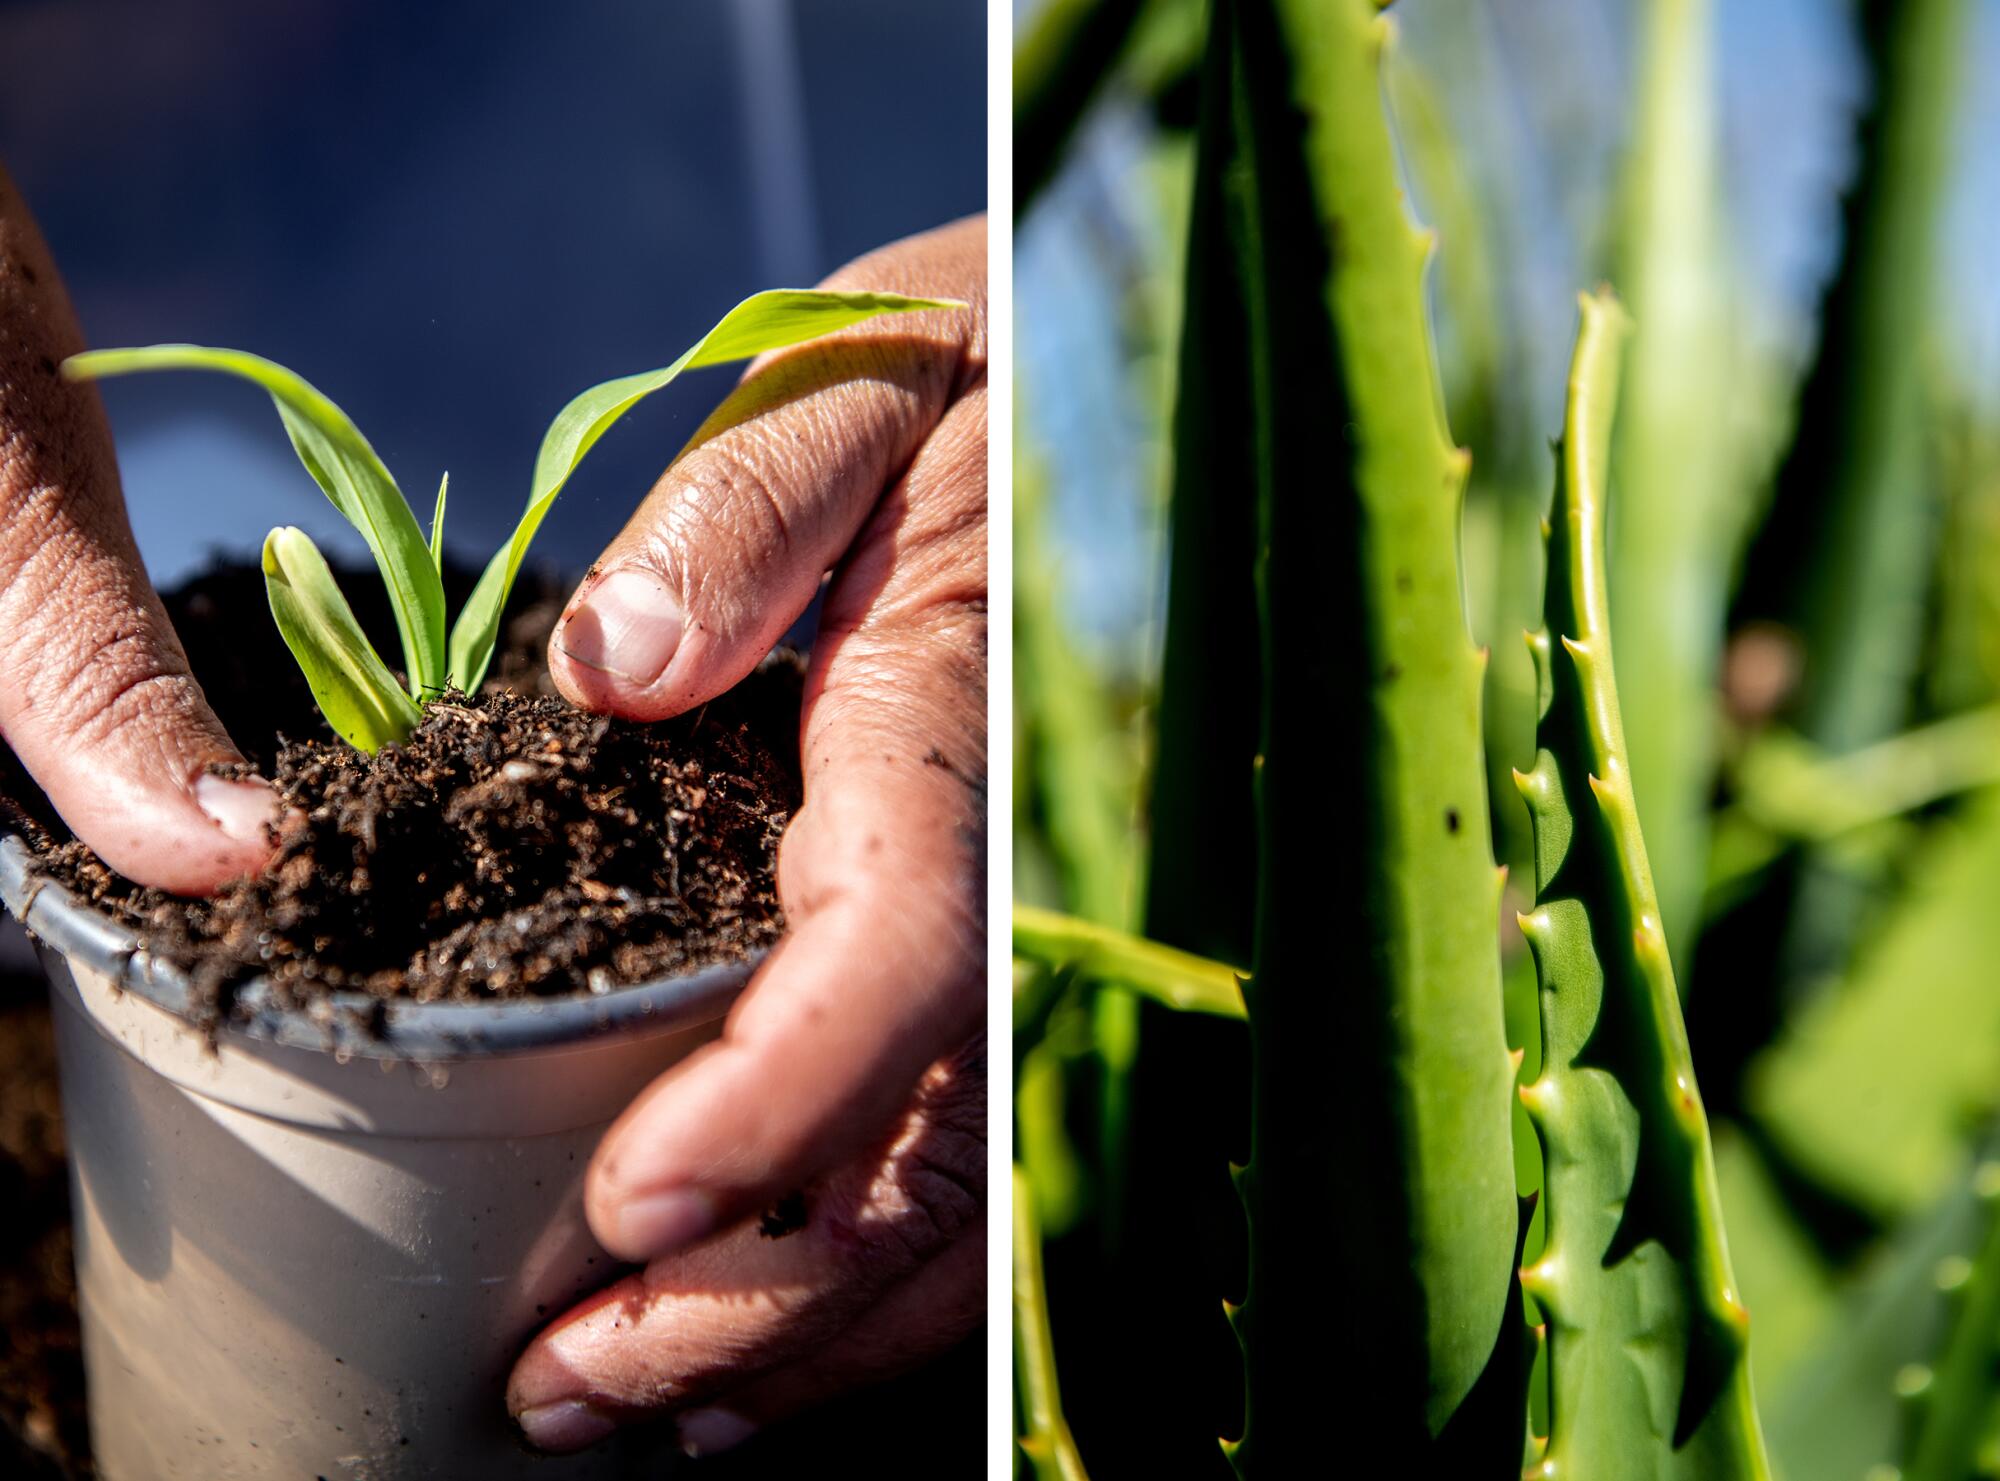 Two photos side by side, one of hands planting a small plant and one of a closeup view of an aloe plant.